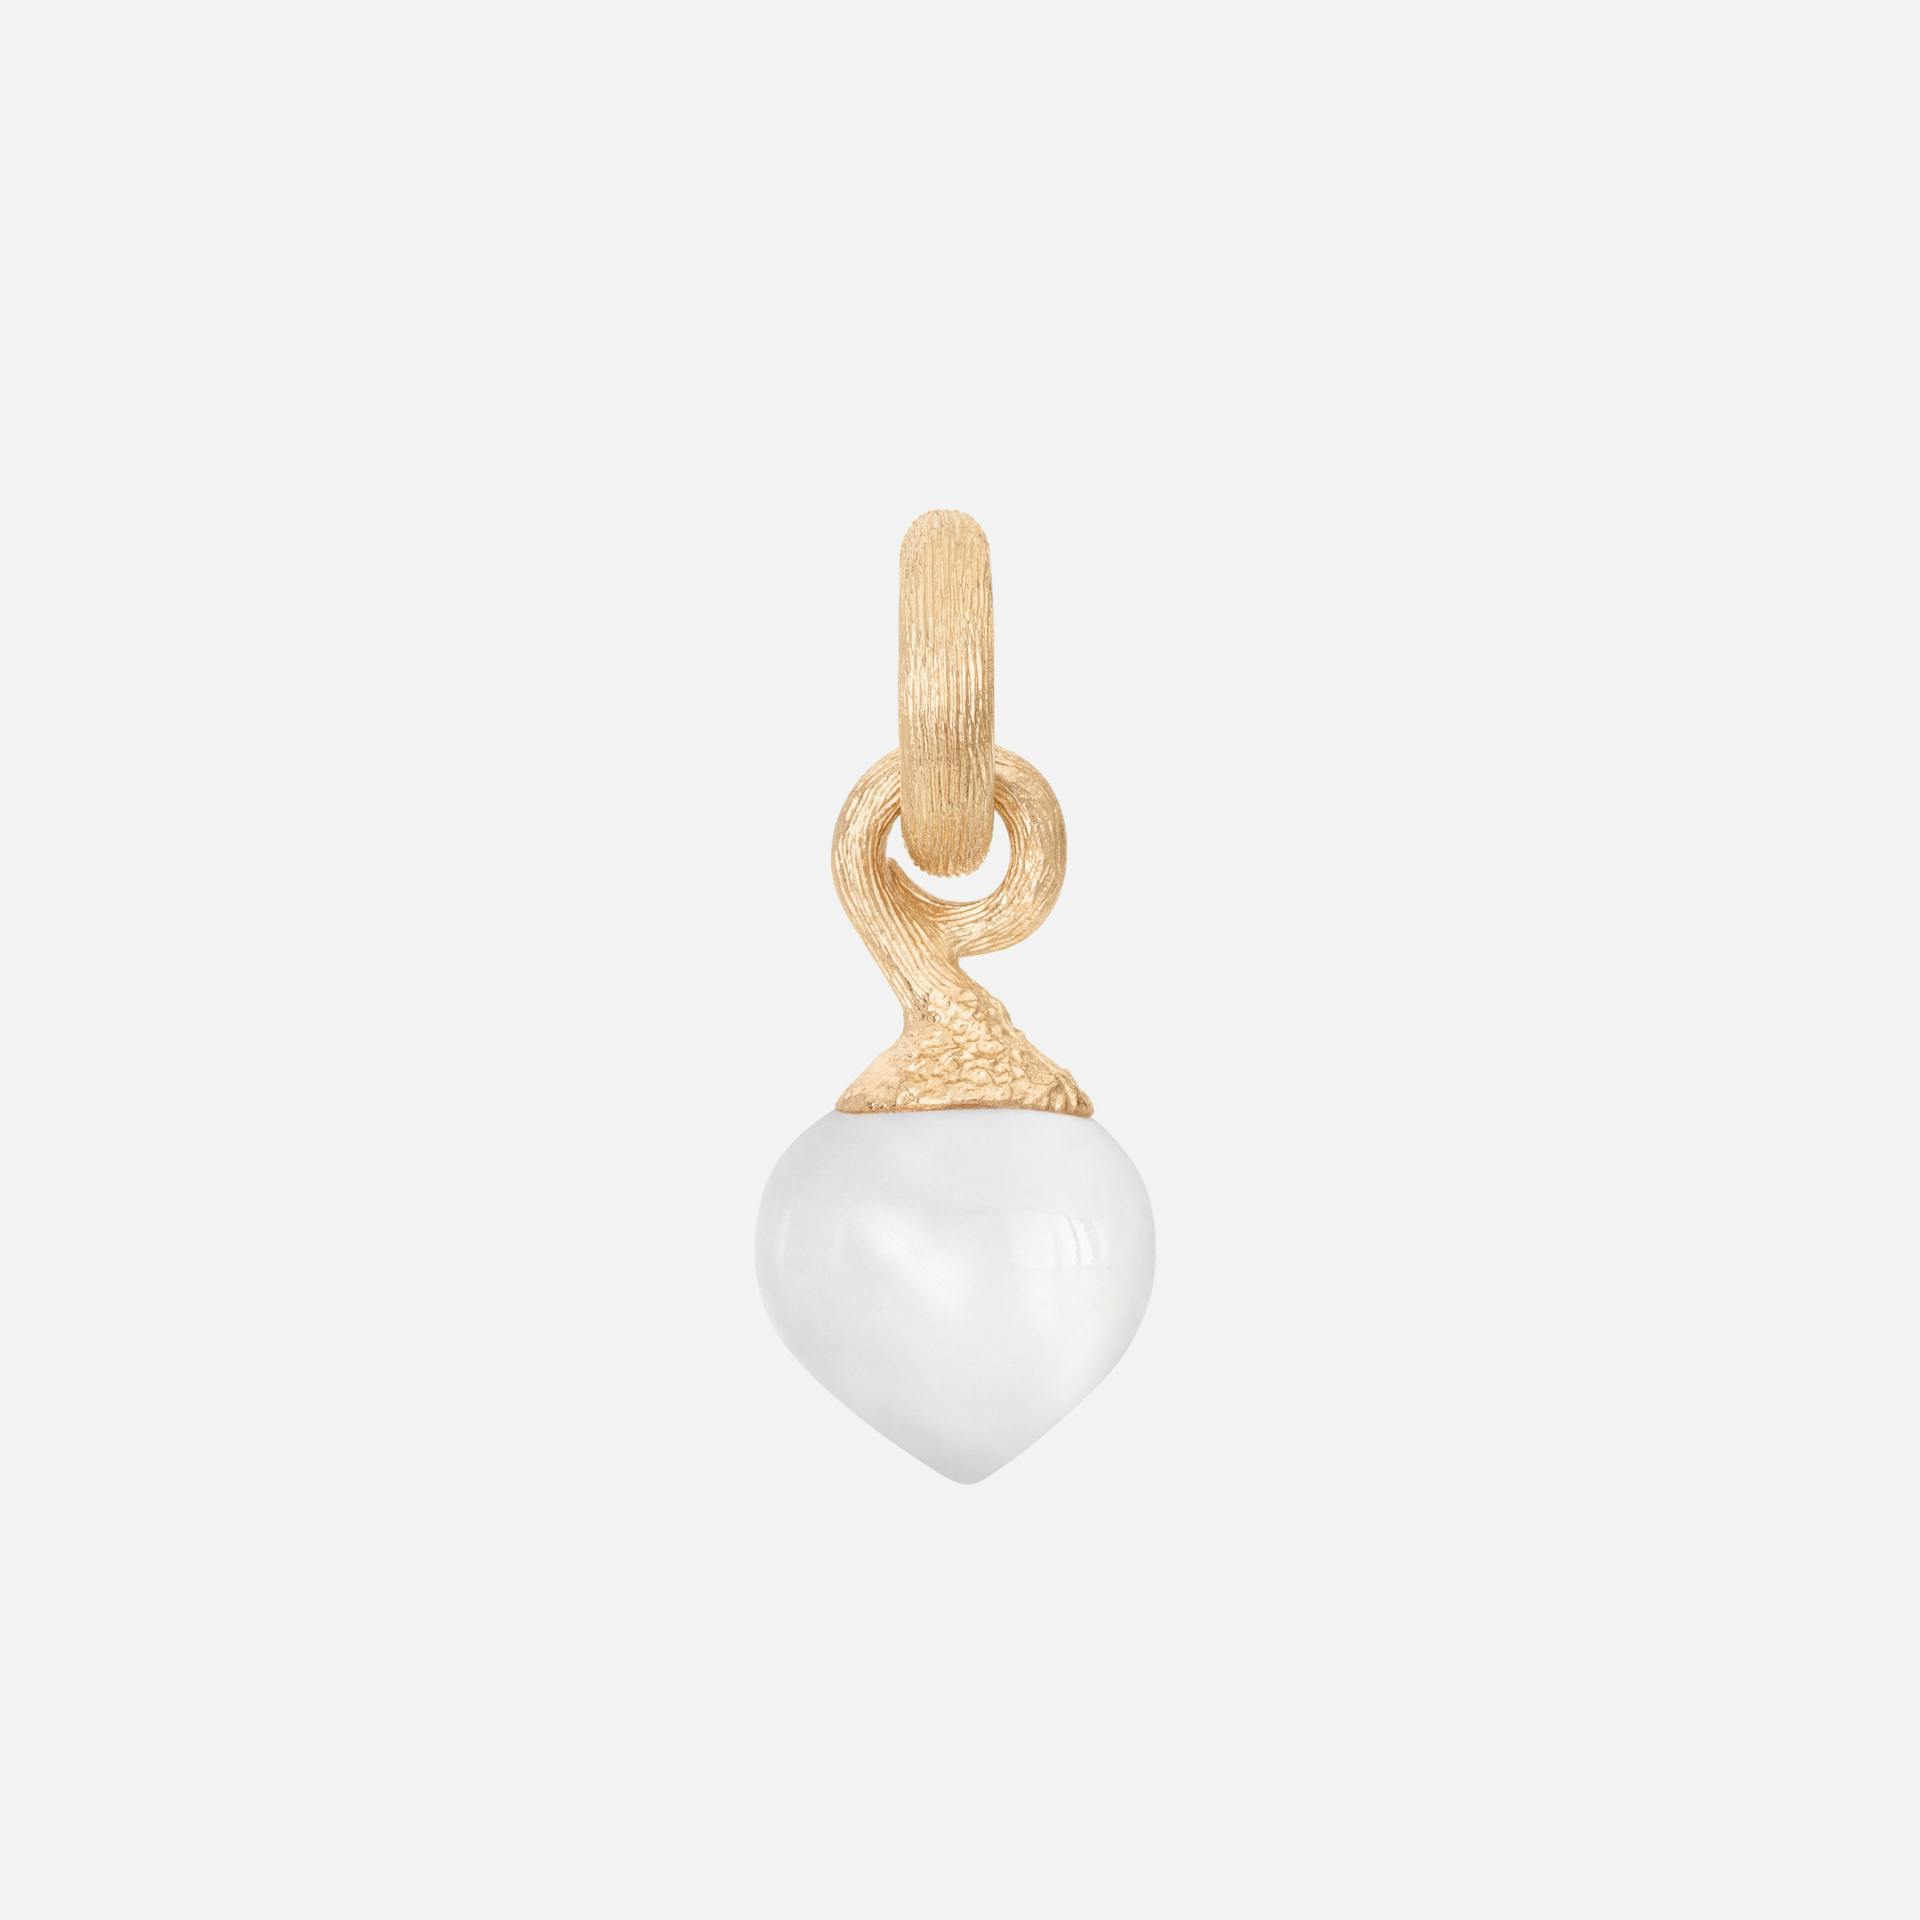 Sweet drops charm 18k gold with white moonstone